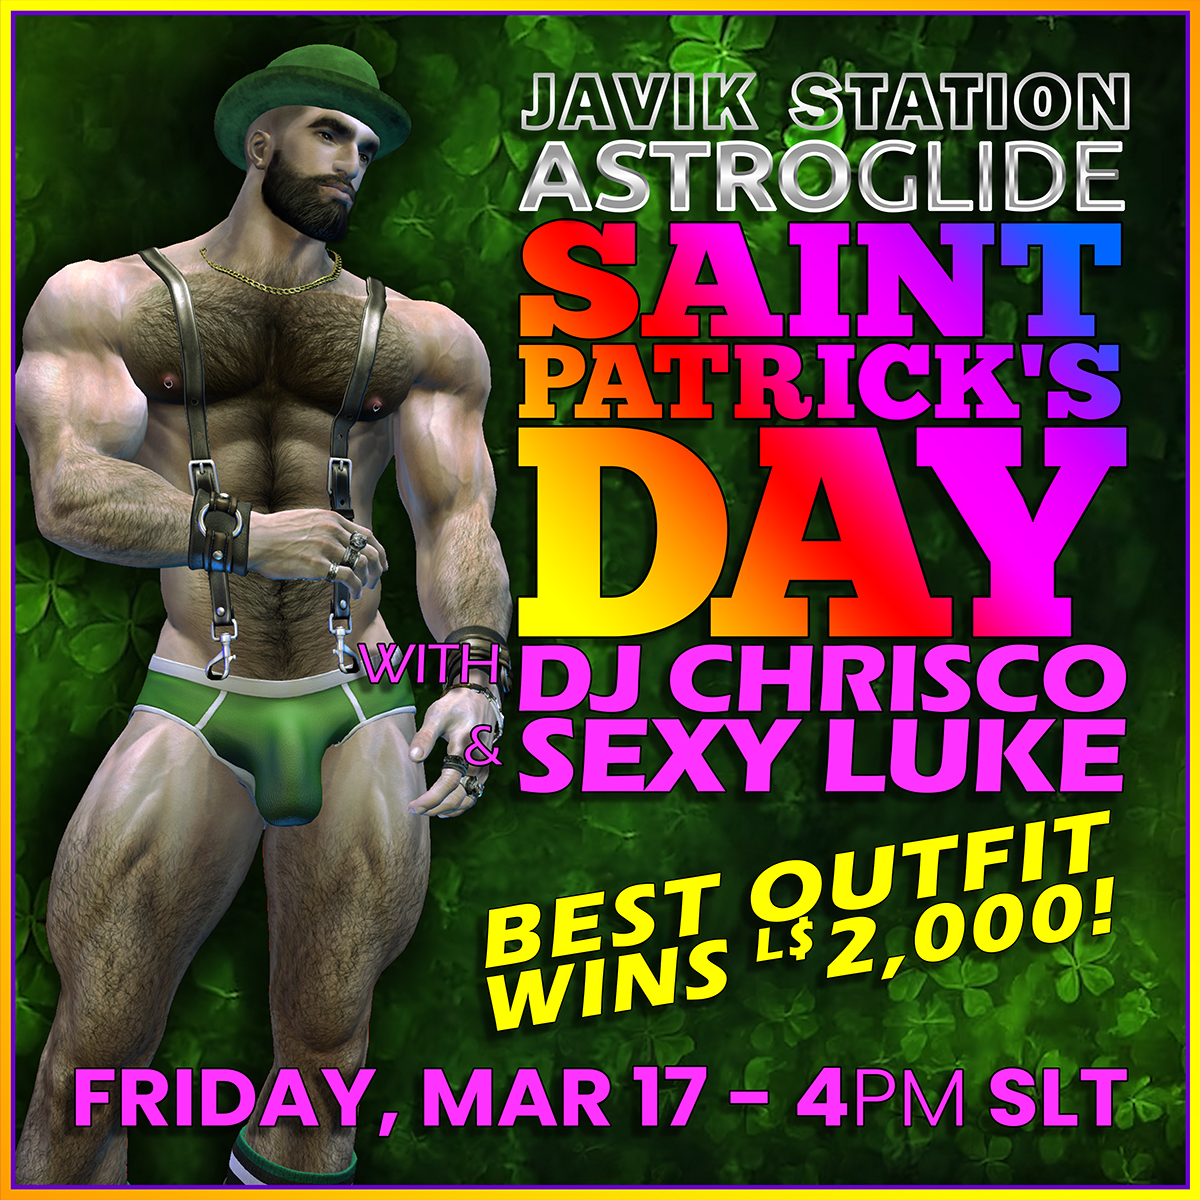 ASTROGLIDE ST. PATRICK’S DAY PARTY with DJ CHRISCO!